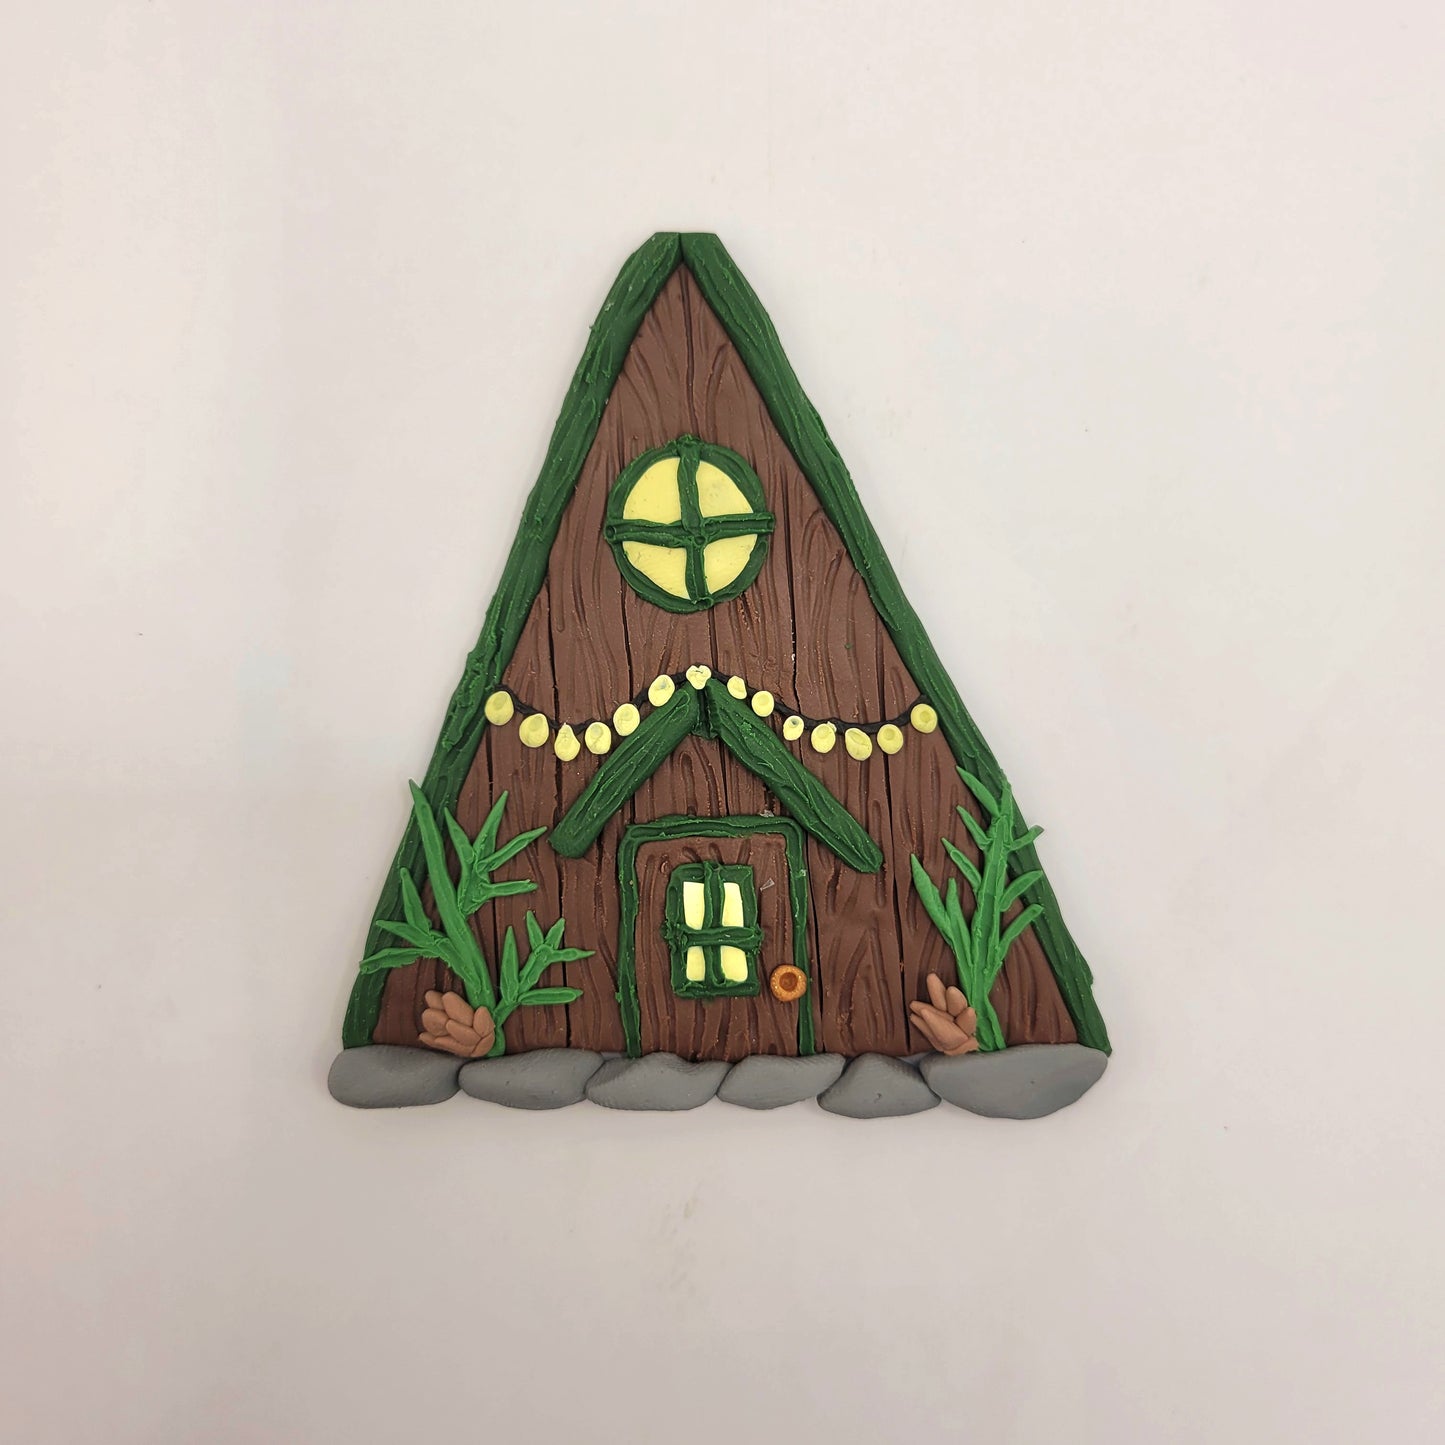 The alpine cabin fairy door rests on a white background. It is brown with a forest green roof and detailed with a window, fairy lights, door, spruce sprigs and pinecones.